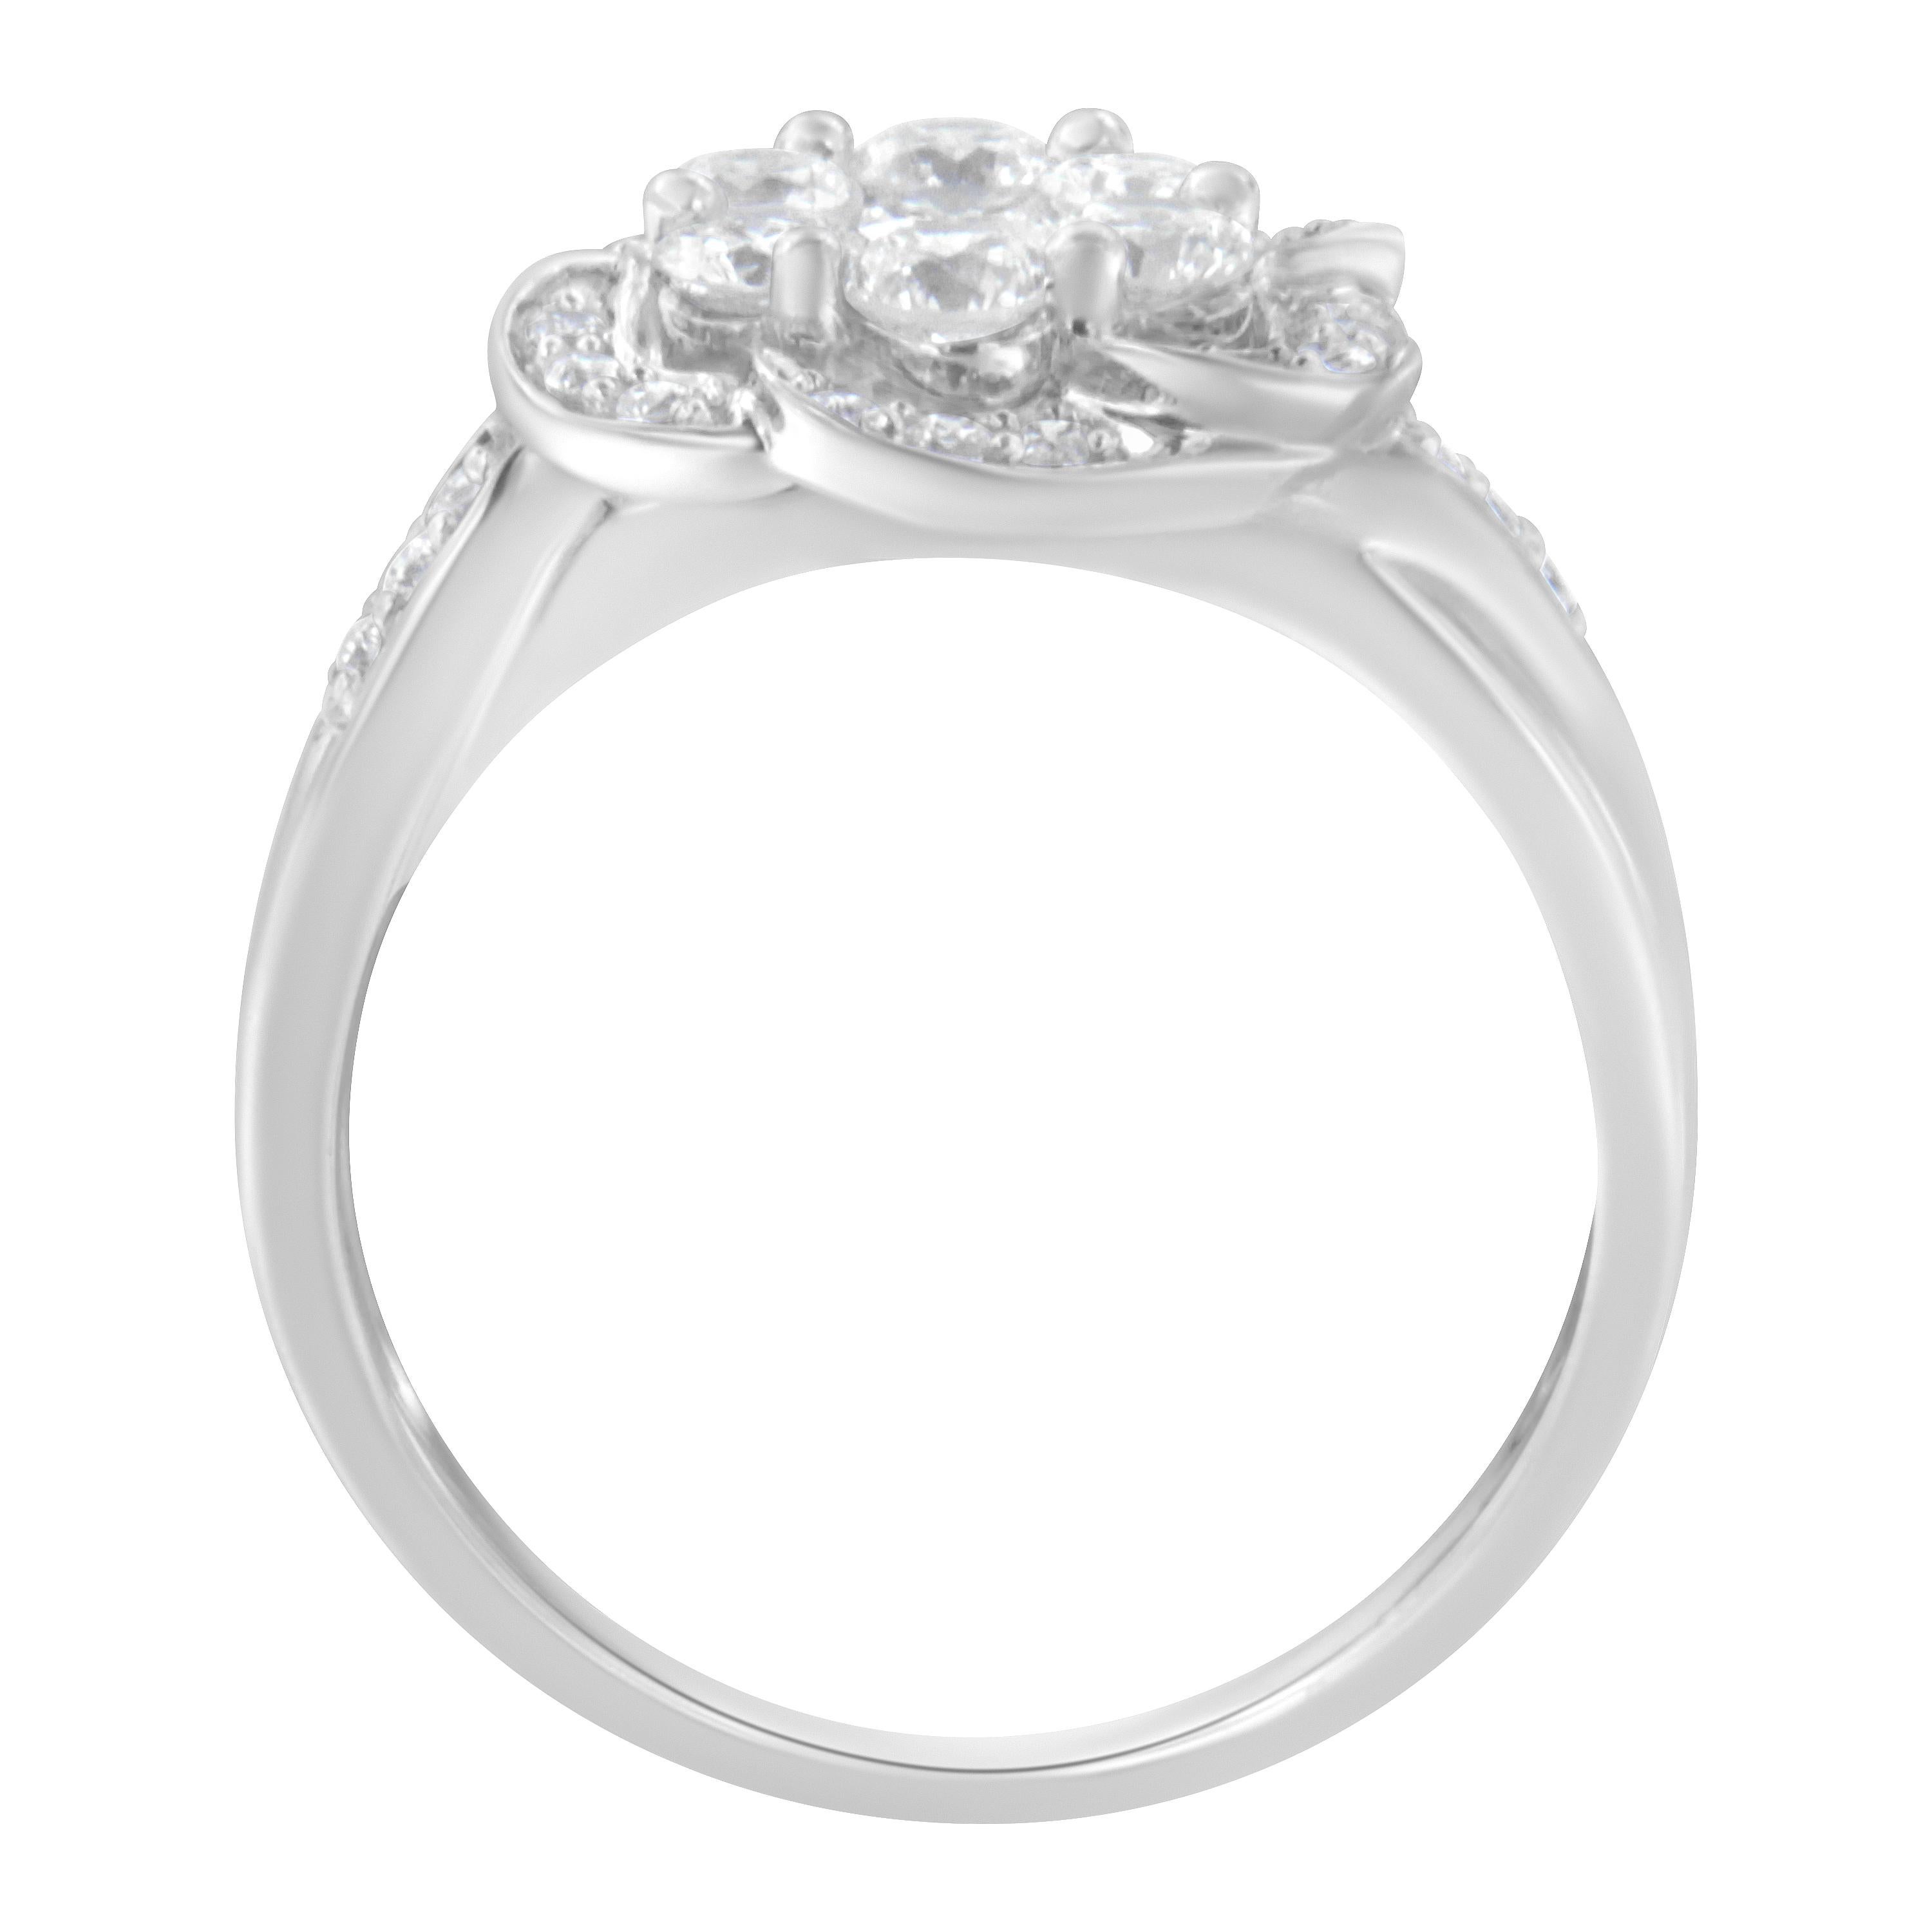 For Sale:  14K White Gold 1.00 Carat Floral Cluster Diamond Ring 2